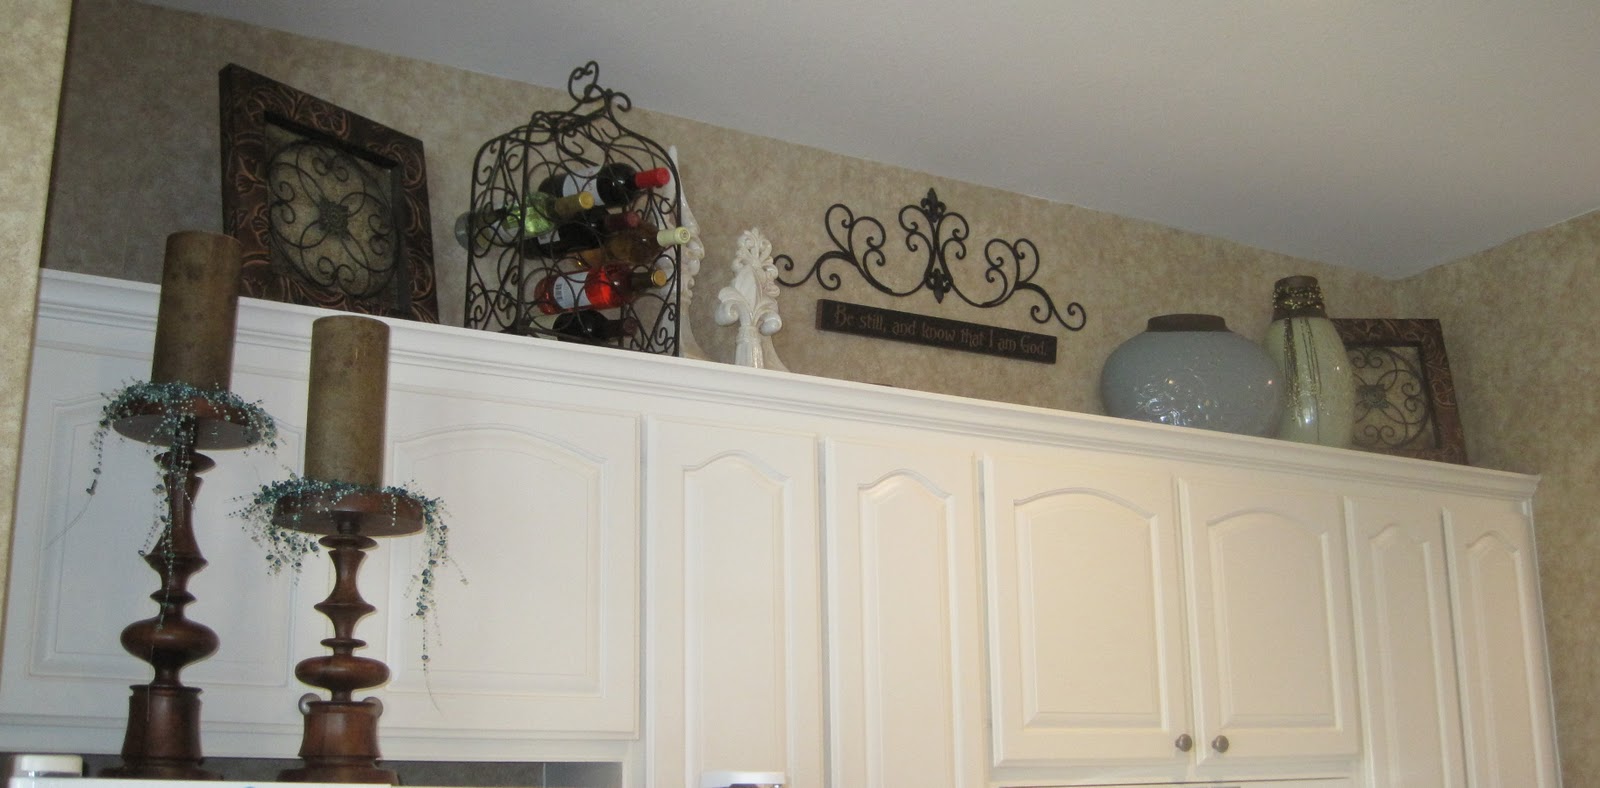  Decorating  above my cabinets  ideas  Kitchen  cabinet  